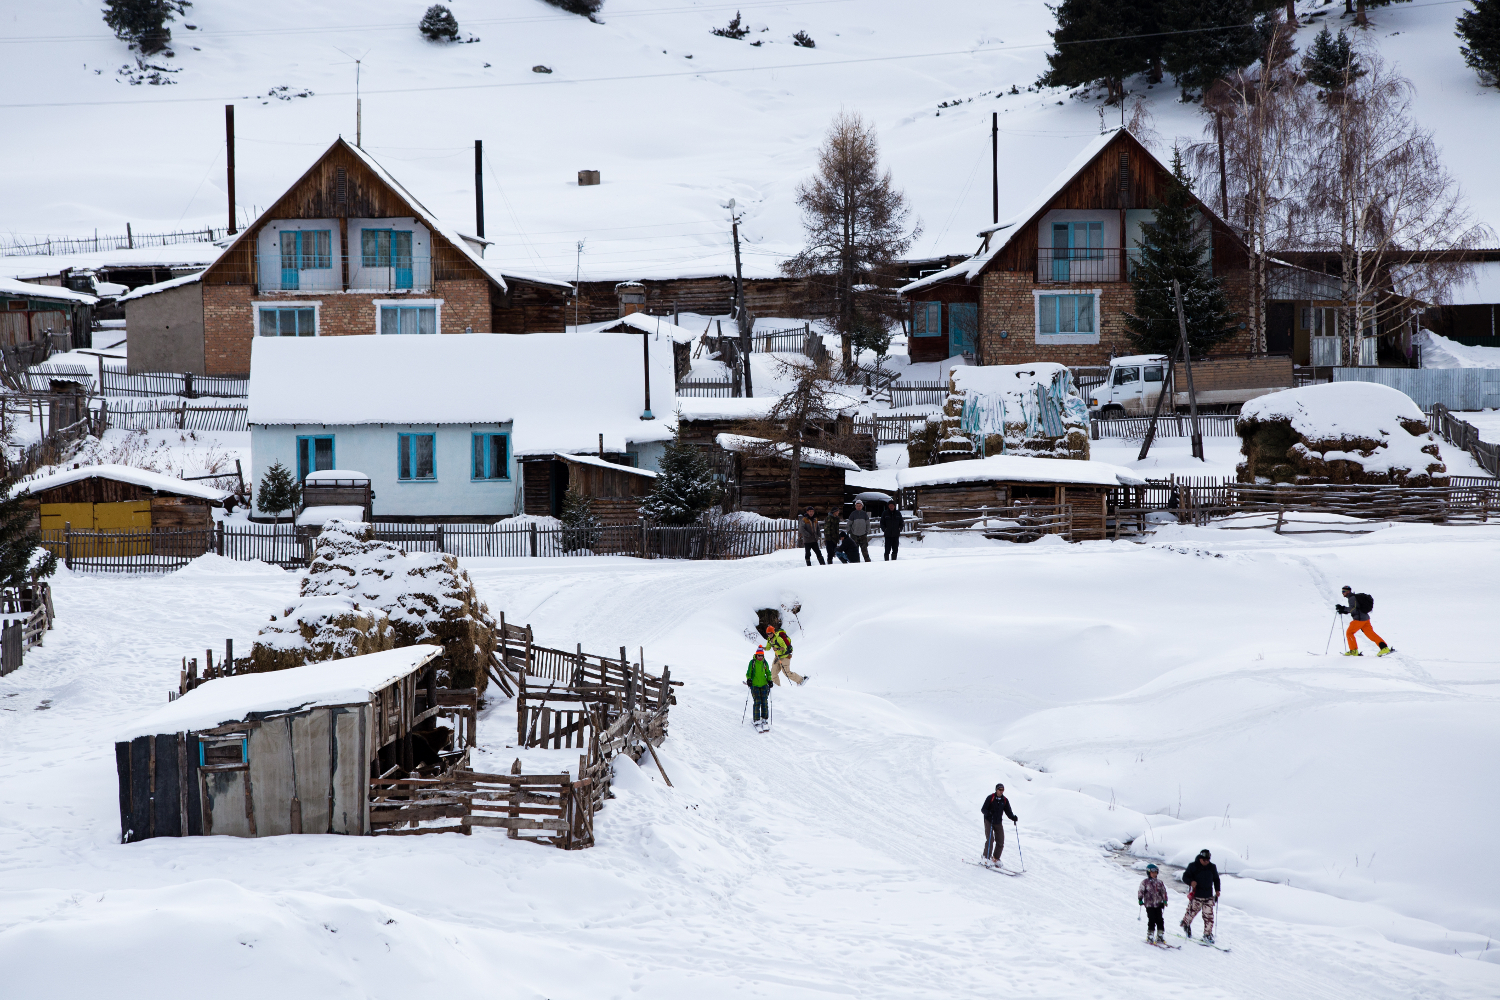 The eco-village of Jyrgalan offers adventurous backcountry snow © Stephen Lioy / Lonely Planet